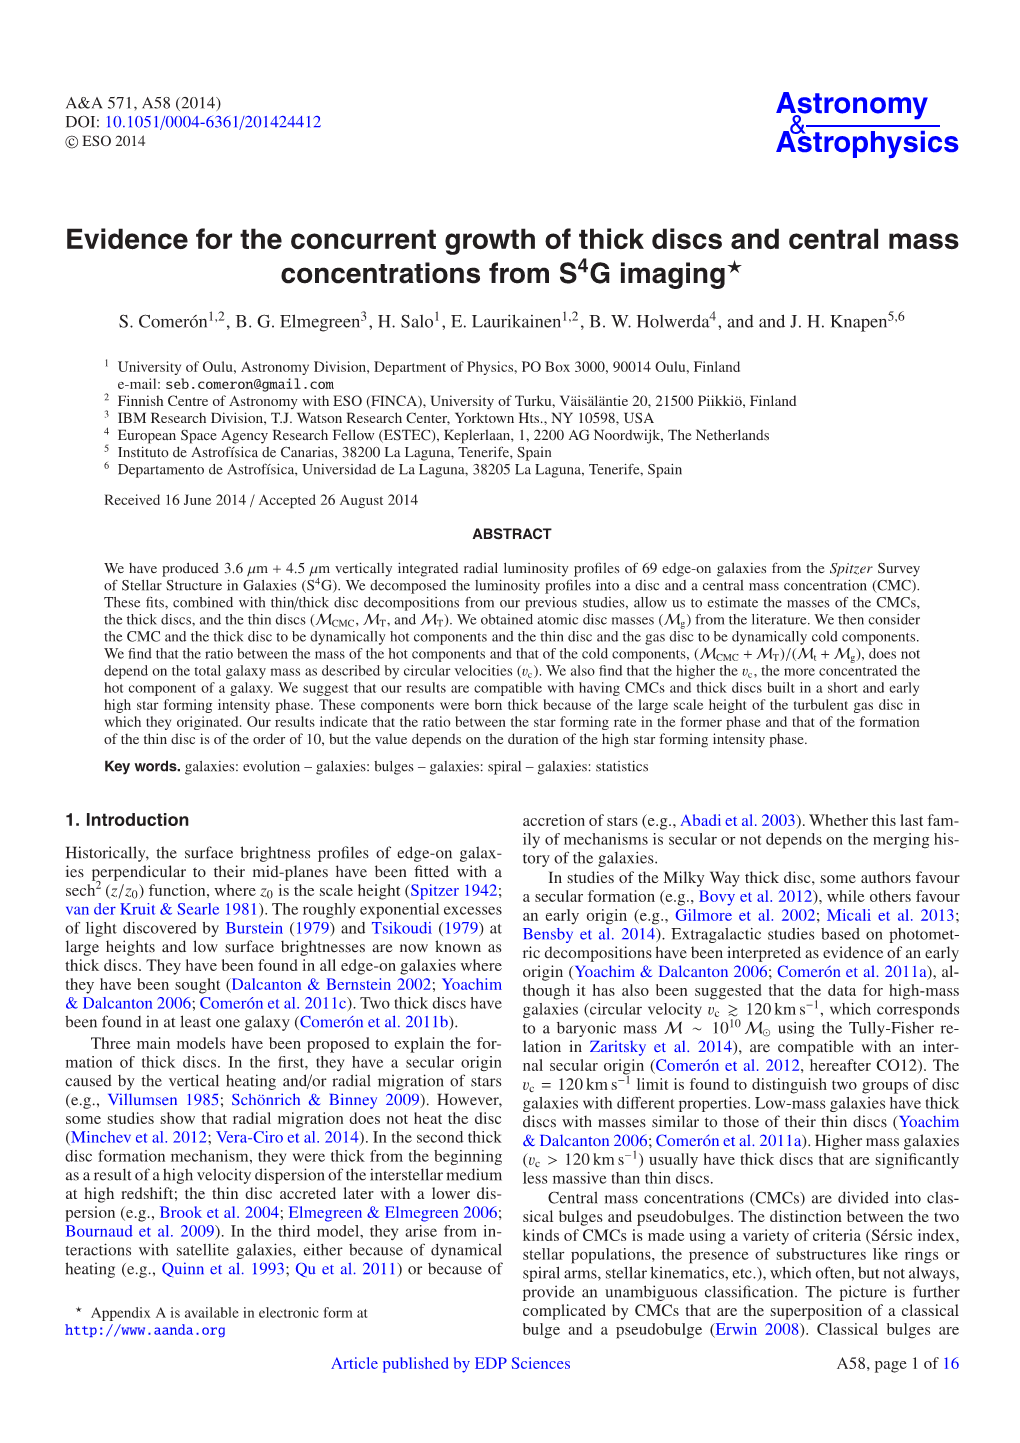 Evidence for the Concurrent Growth of Thick Discs and Central Mass Concentrations from S4G Imaging⋆